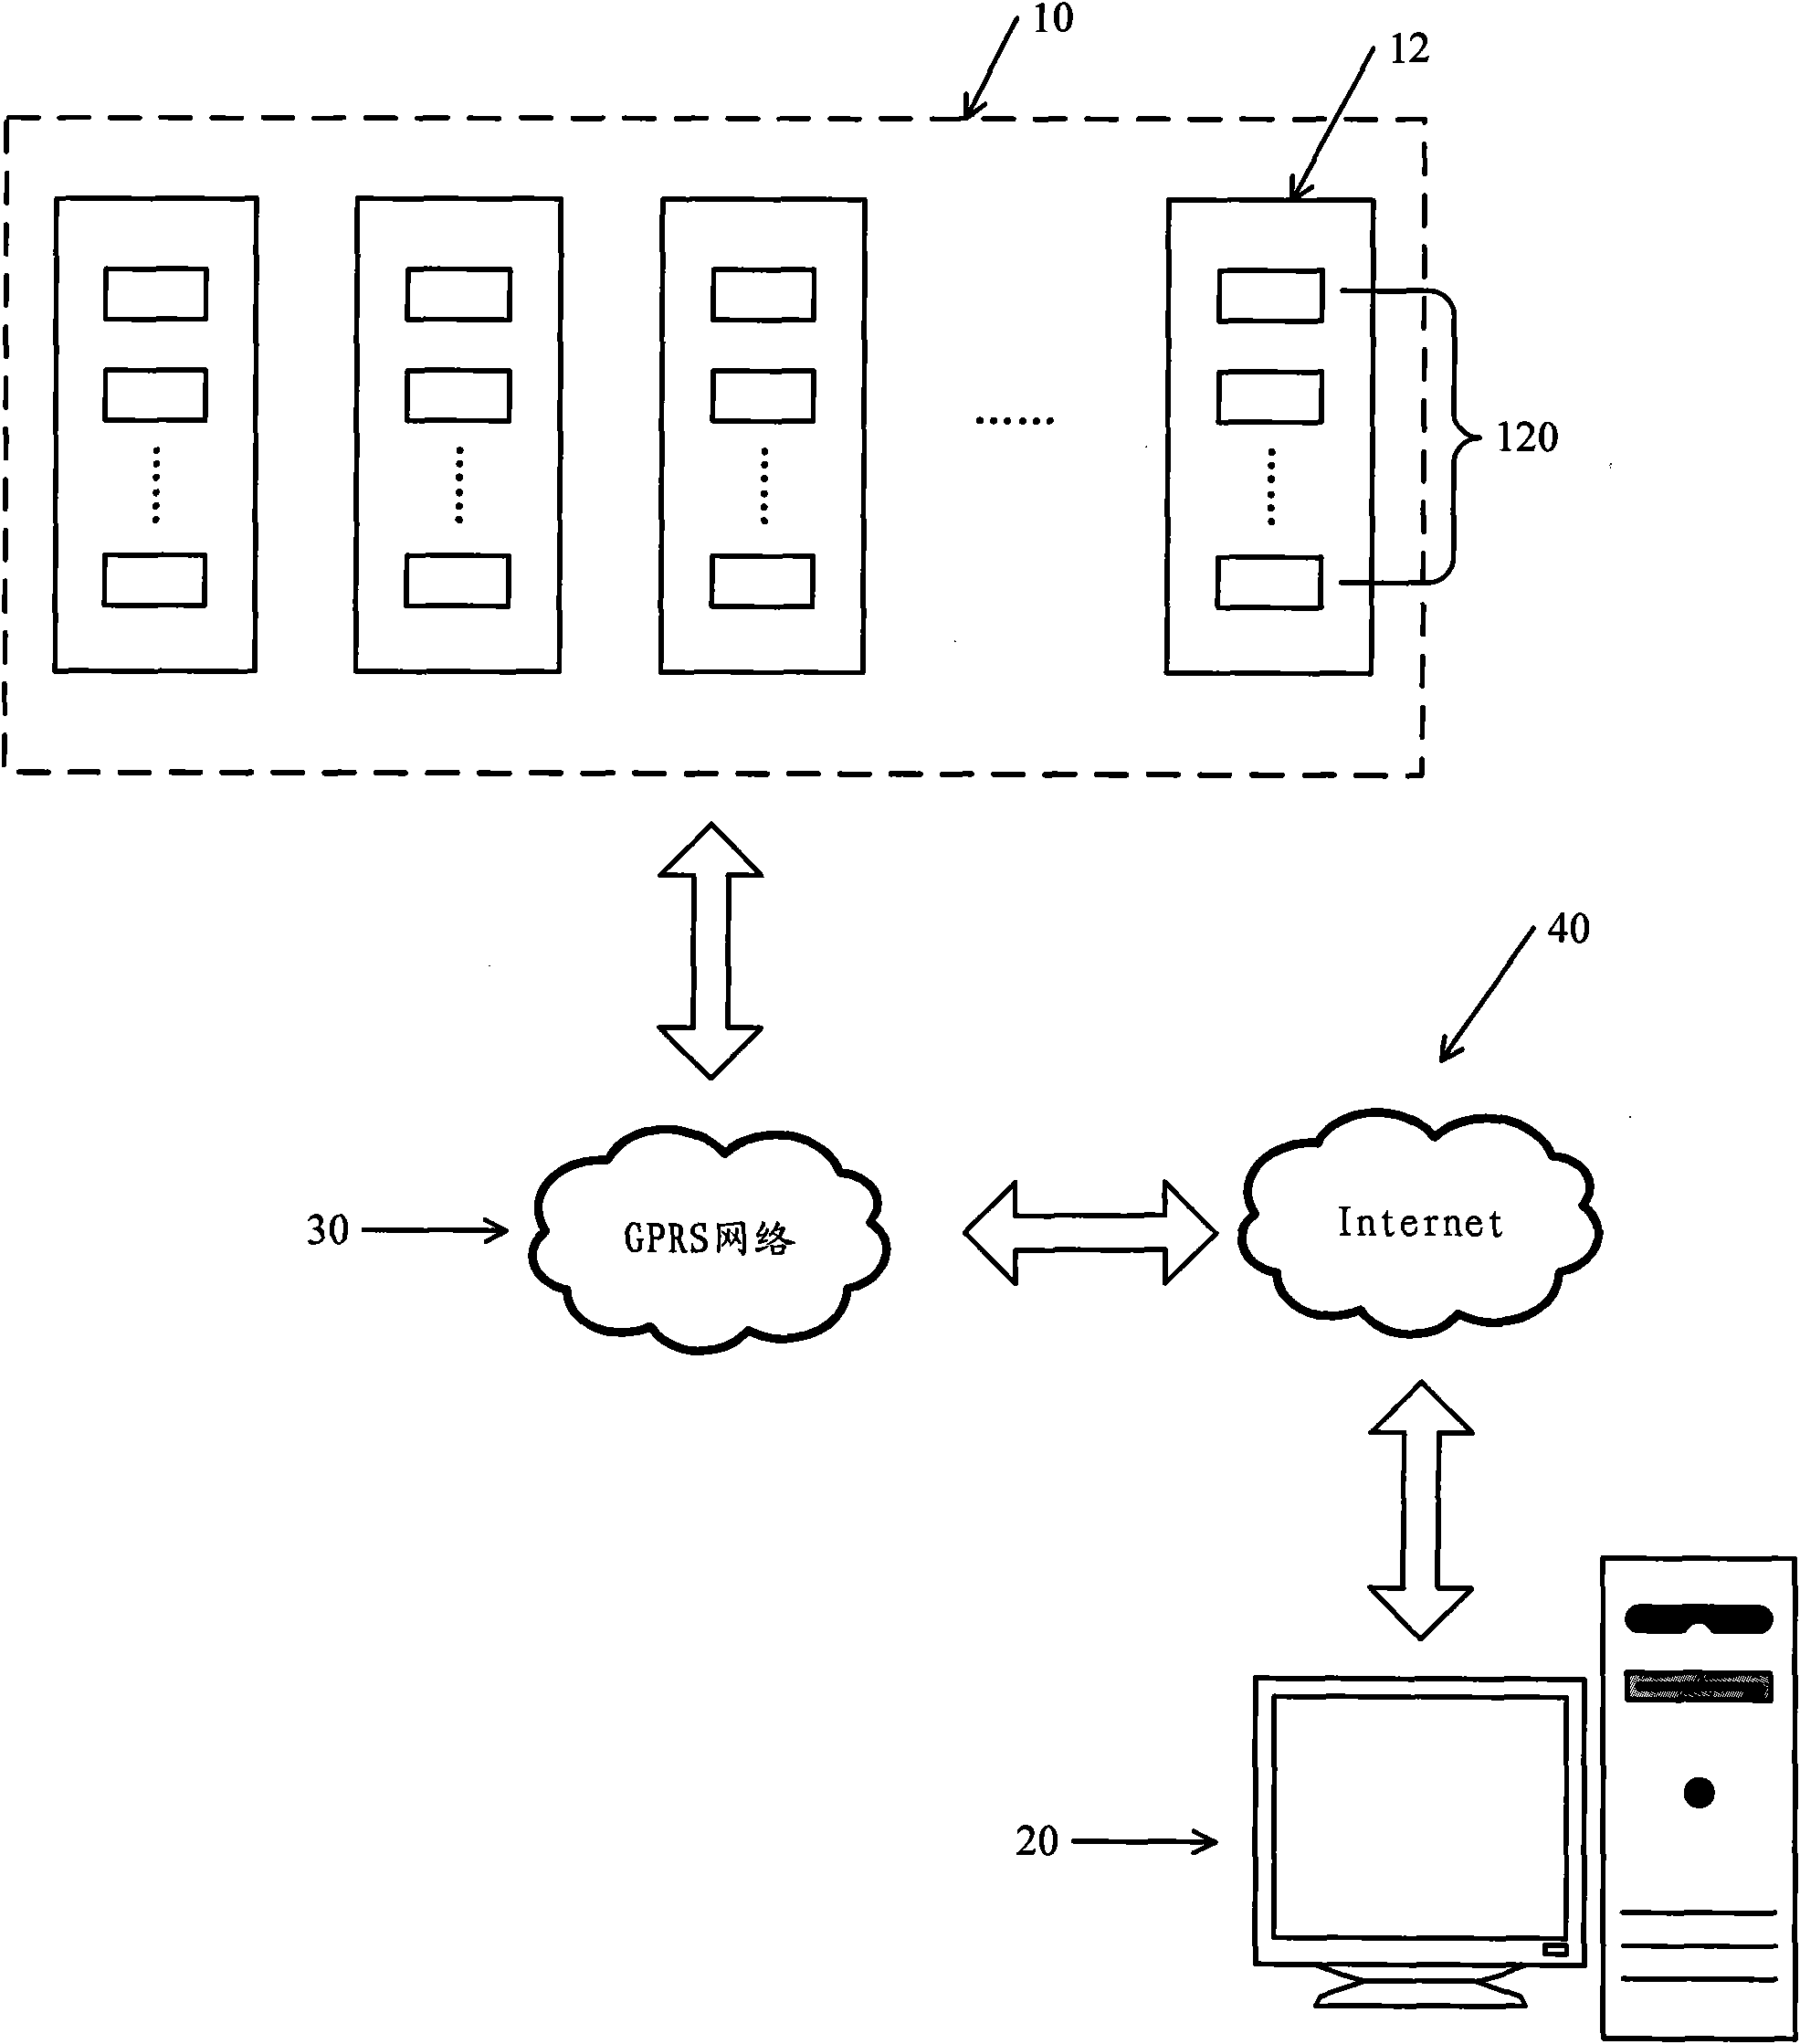 Remote centralized meter-reading system